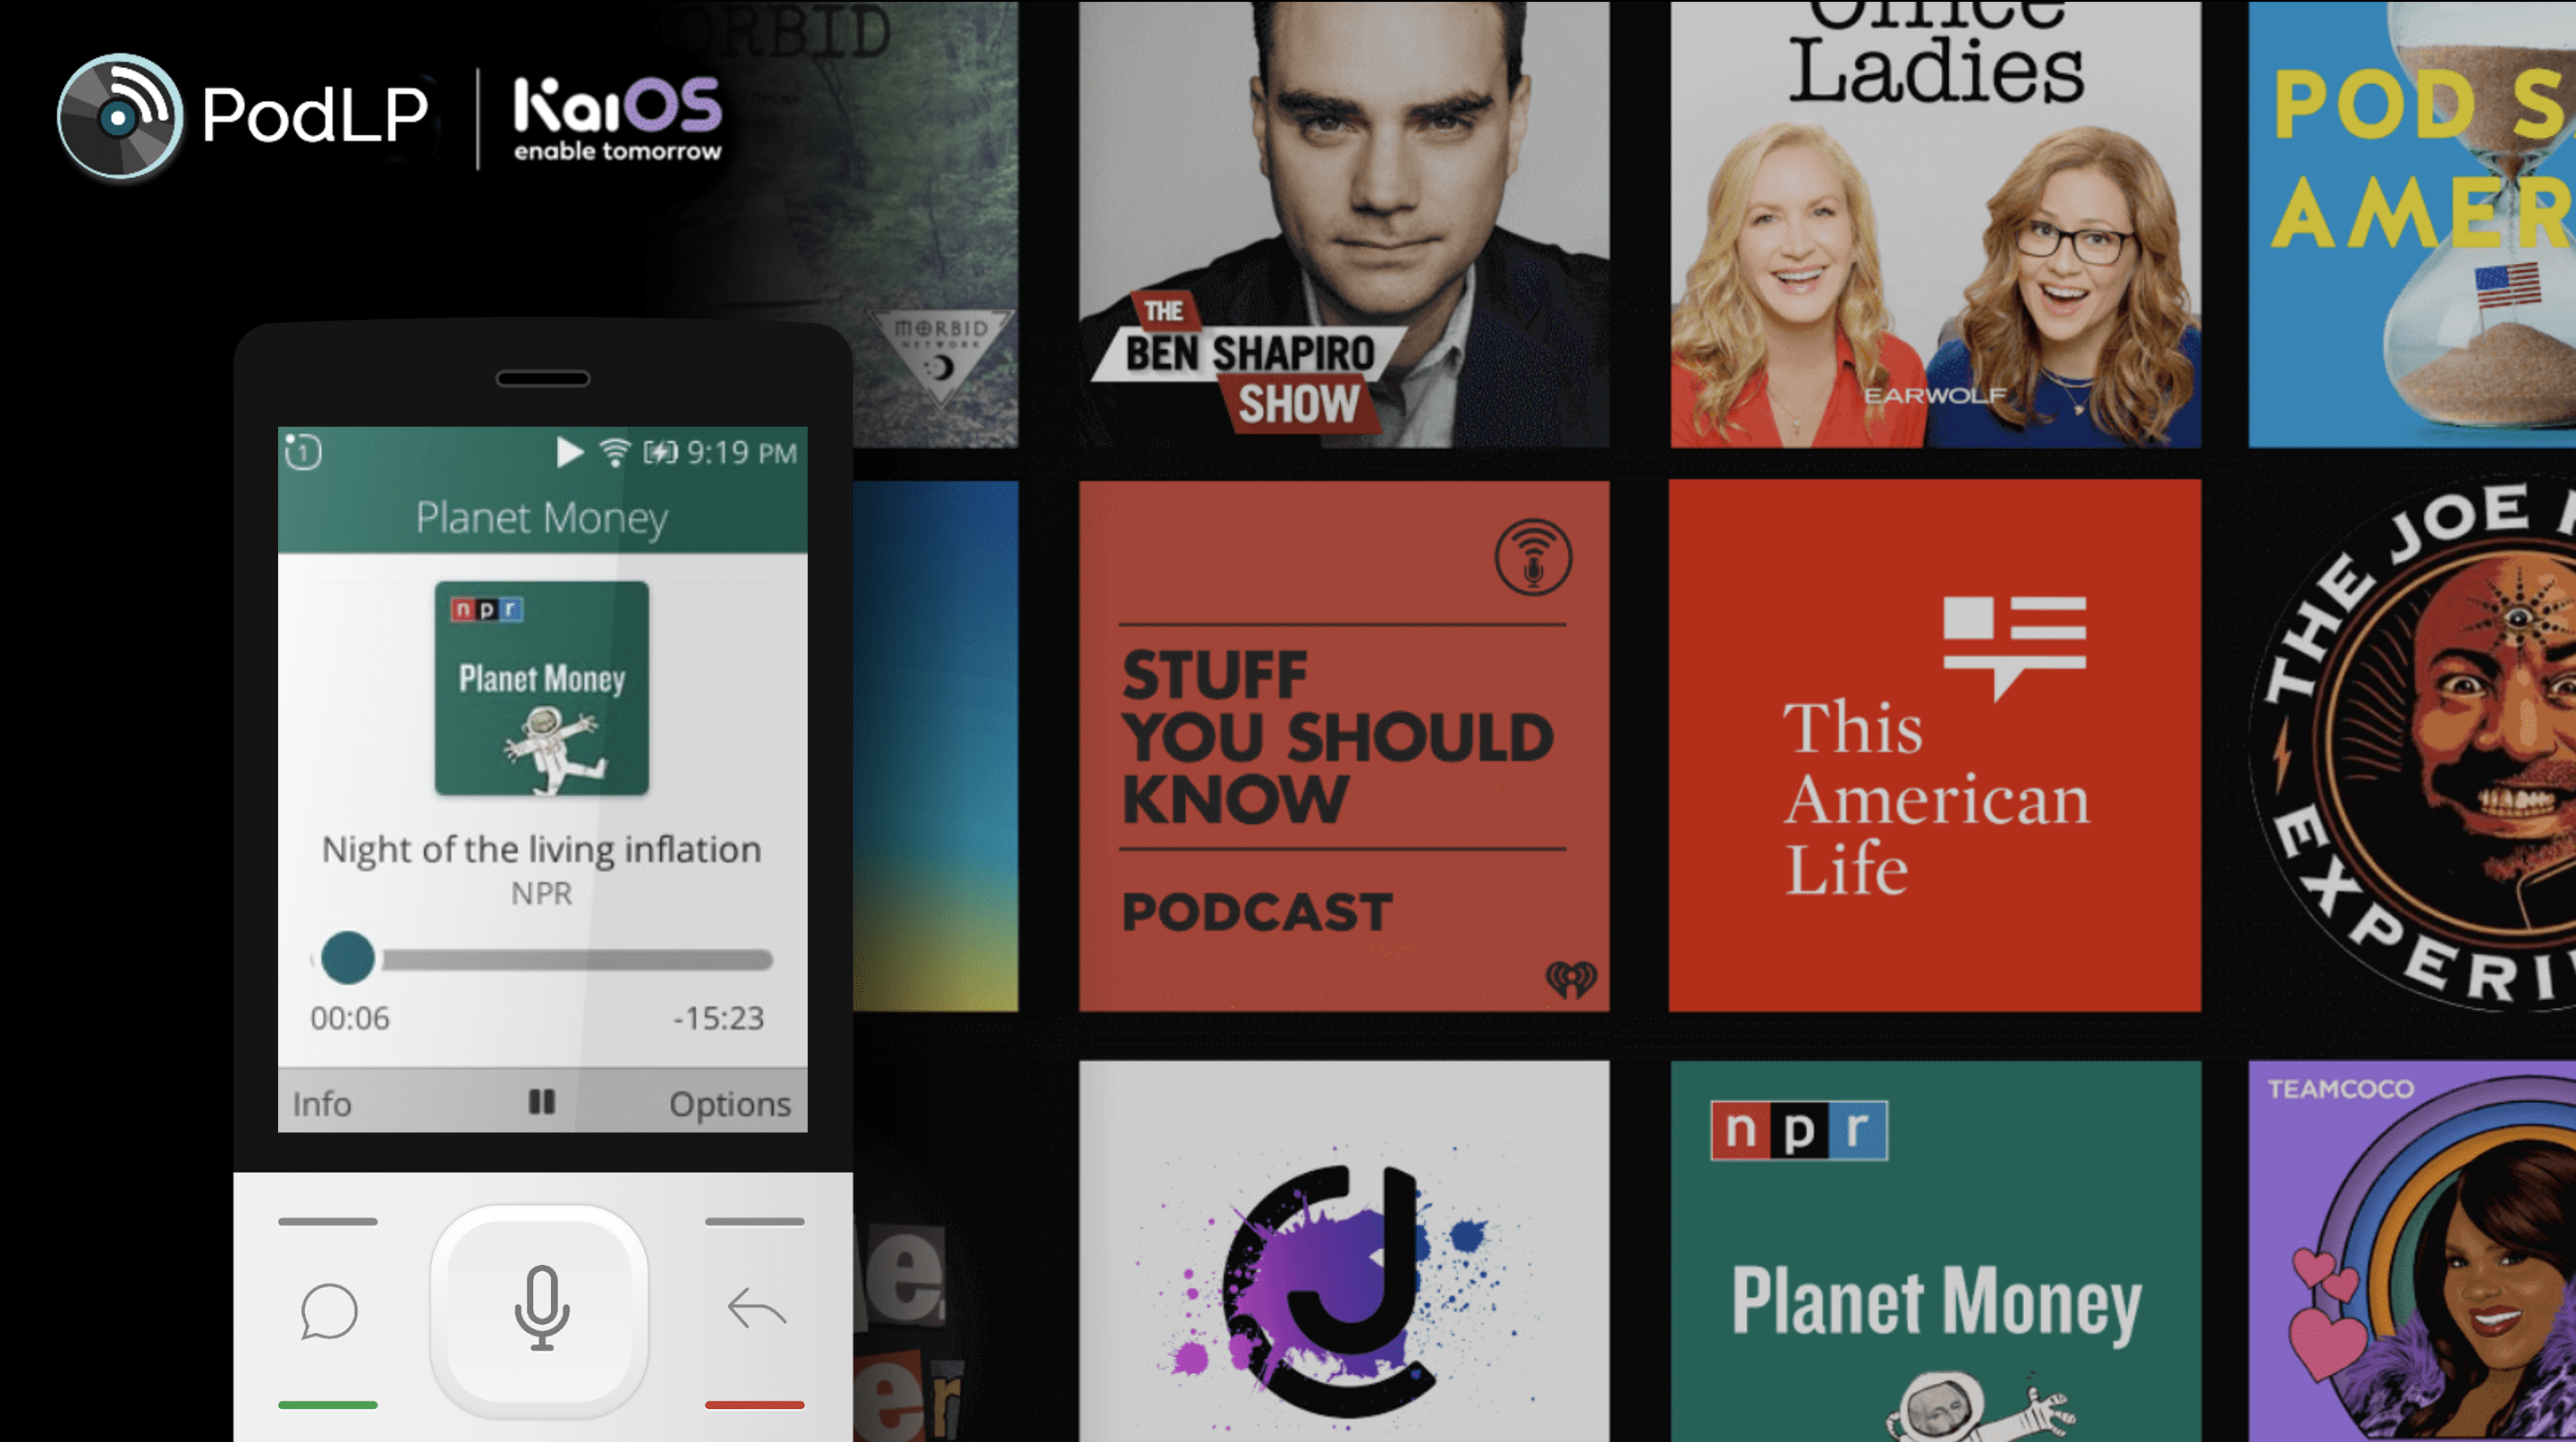 Discover PodLP: The Leading Podcast App for KaiOS Smart Feature Phones!